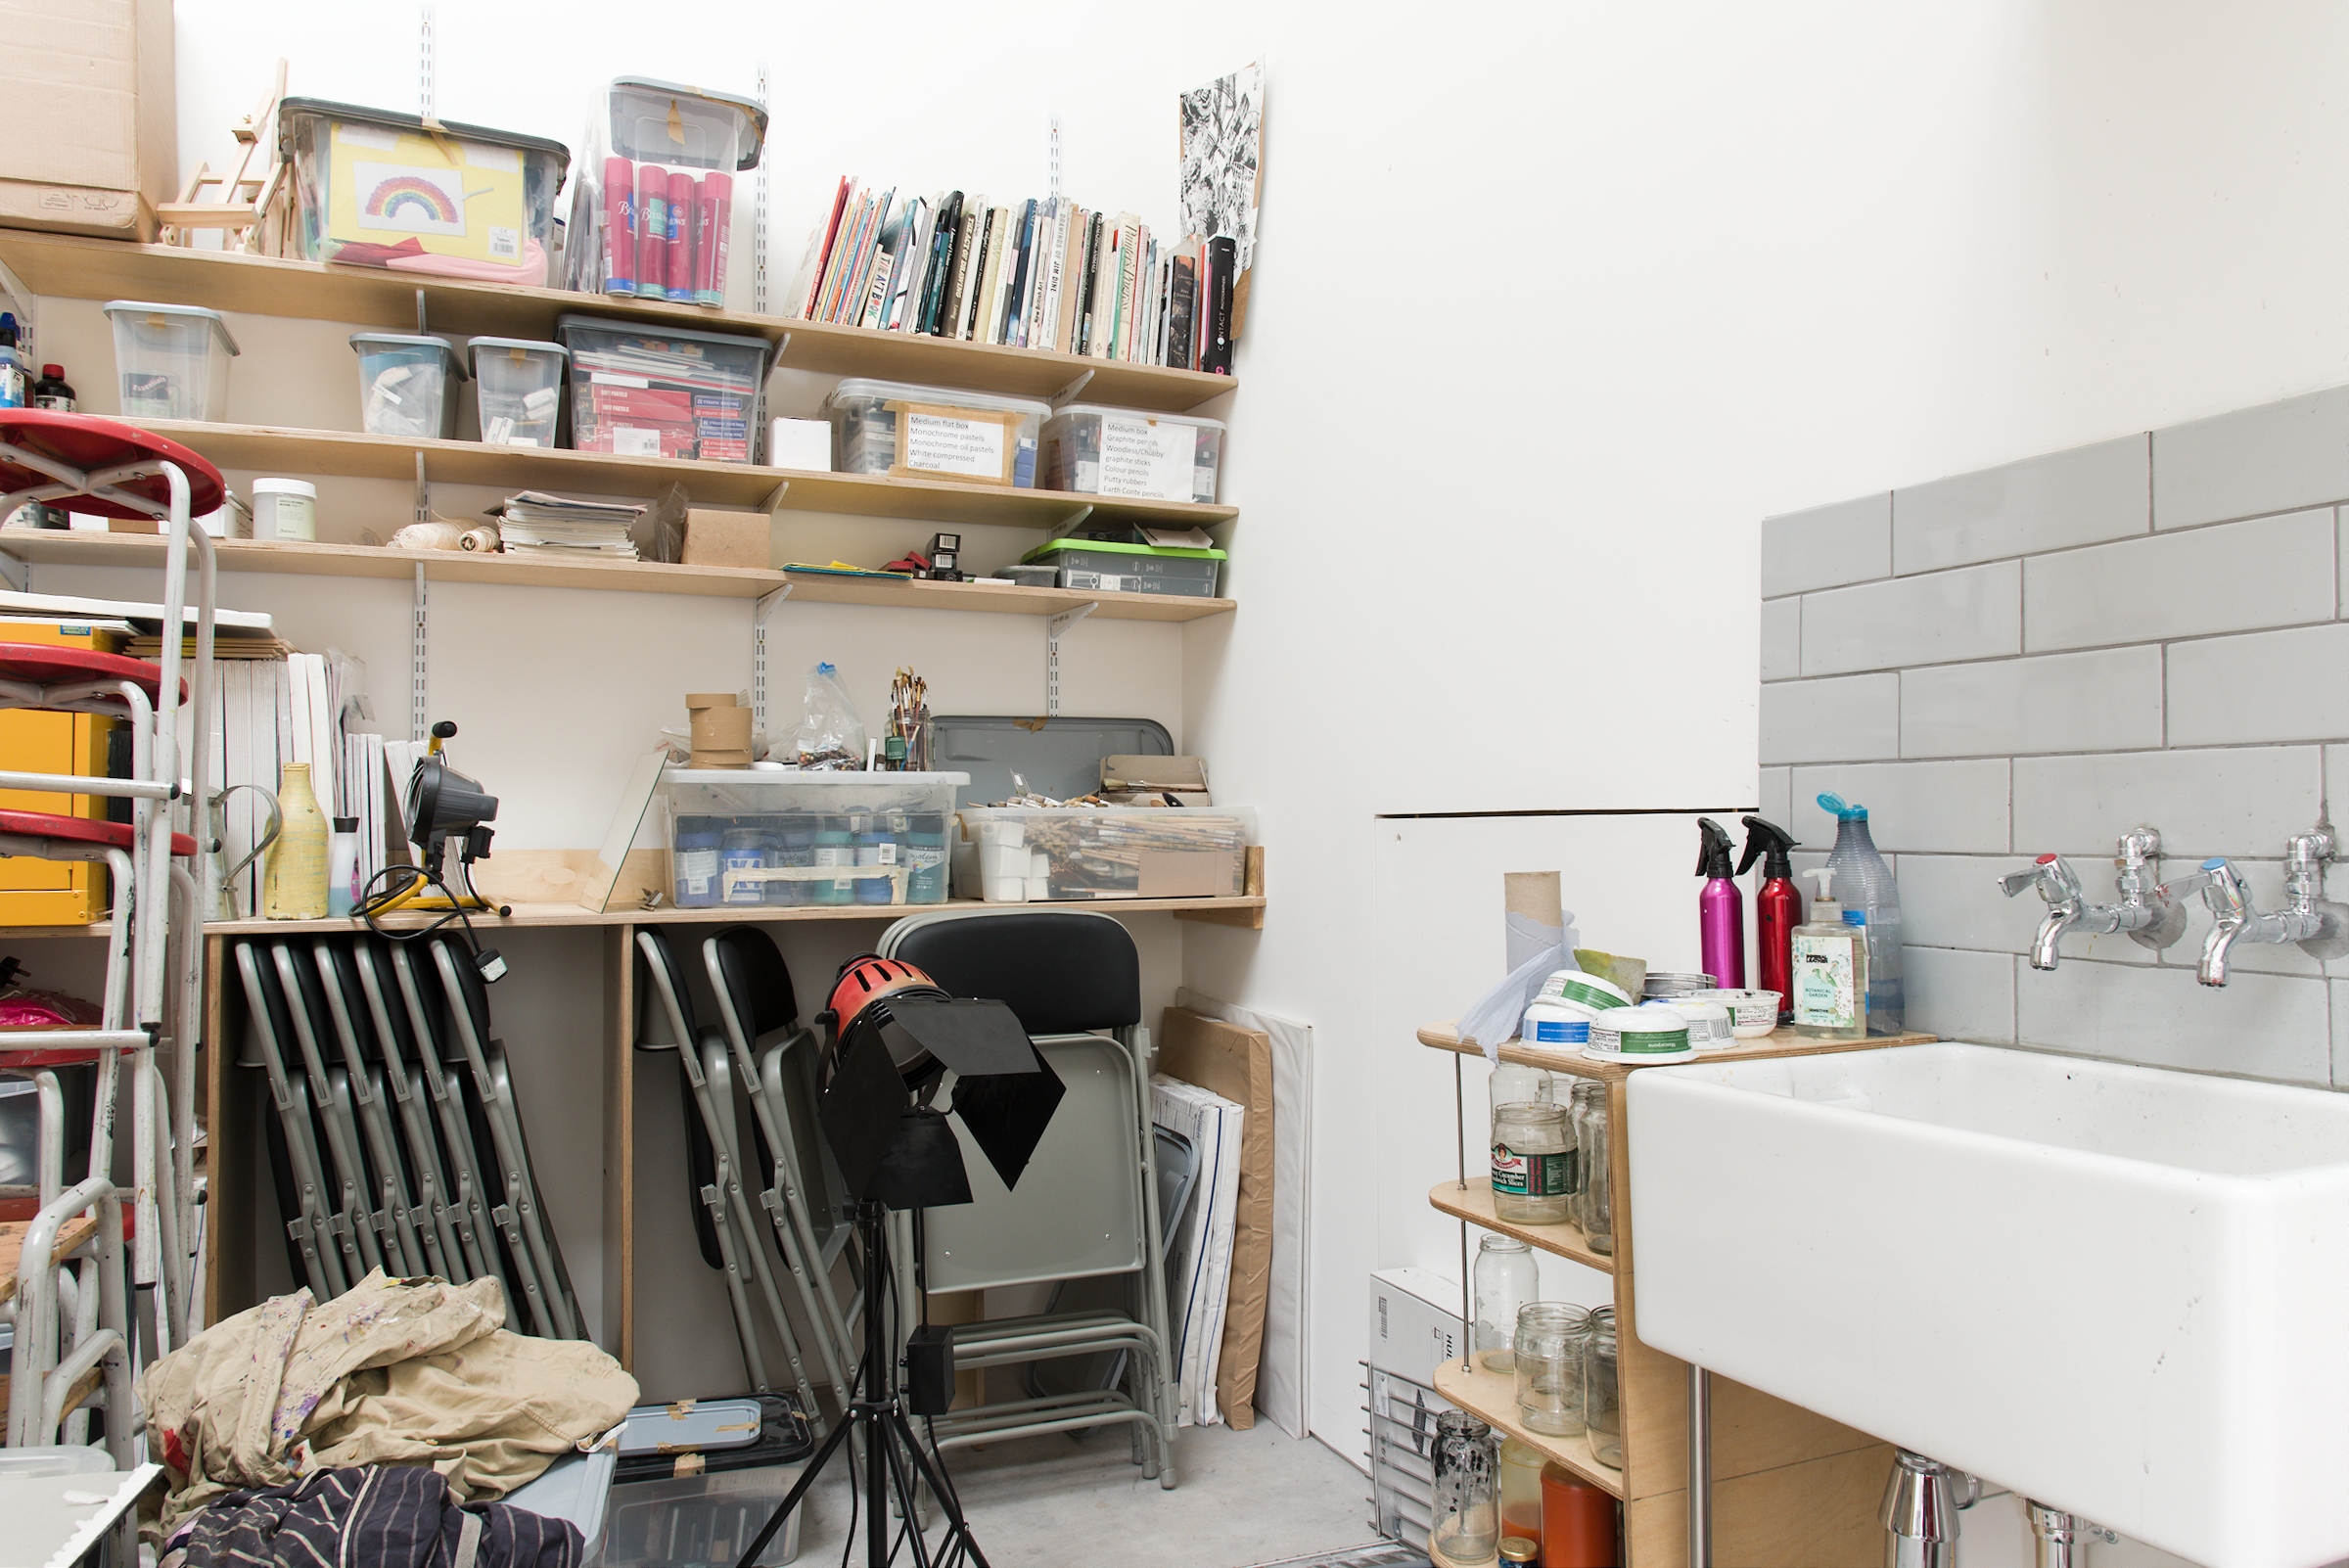 The purpose built storage area of the new studio has plenty of room for art materials, paper and a sink for washing brushes 